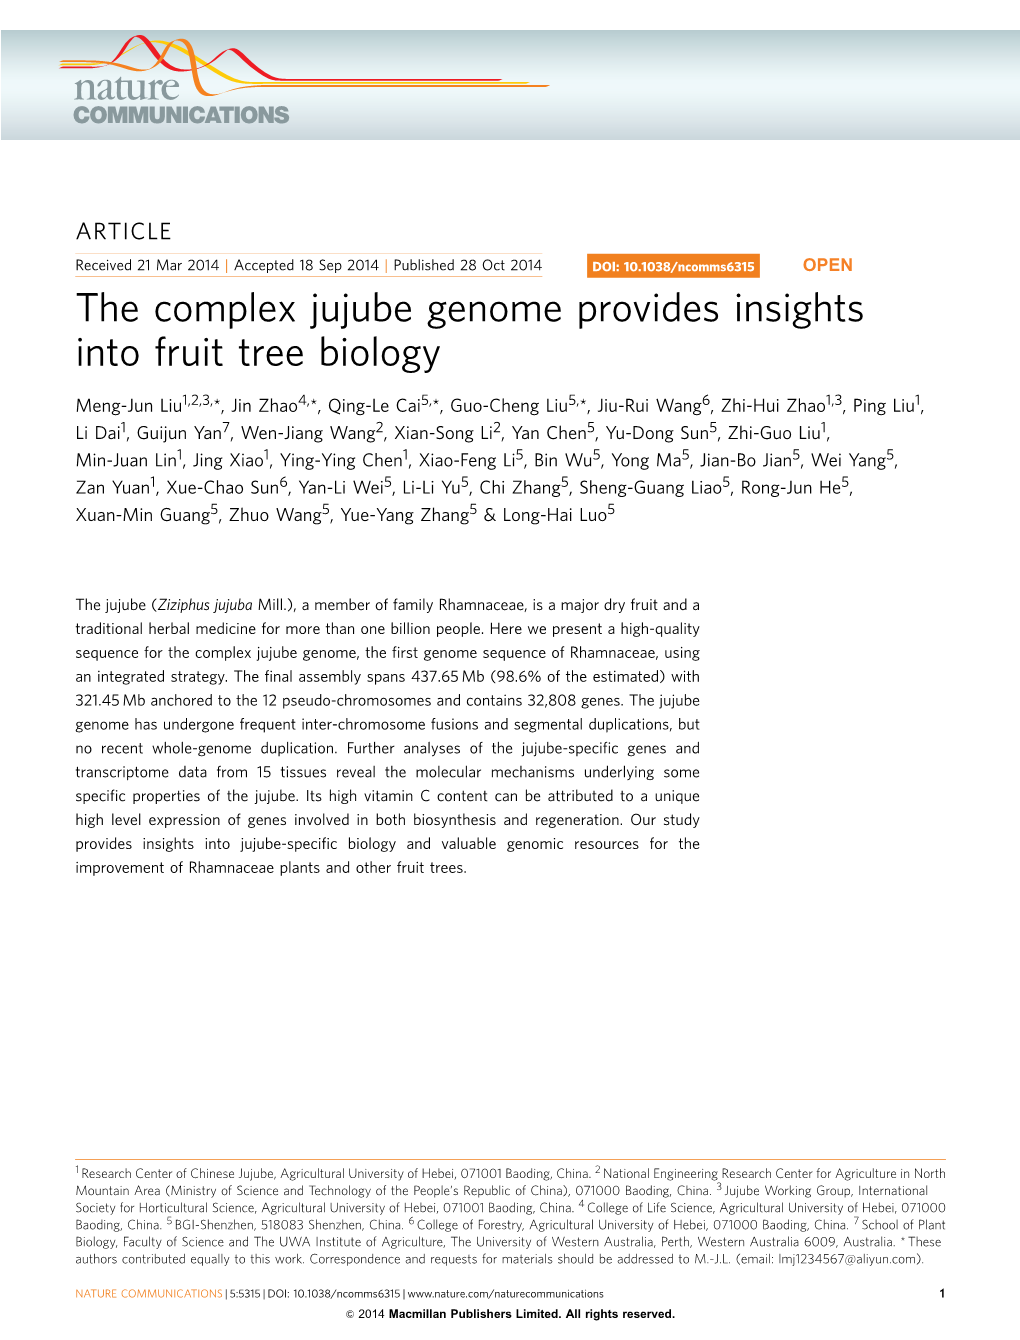 The Complex Jujube Genome Provides Insights Into Fruit Tree Biology